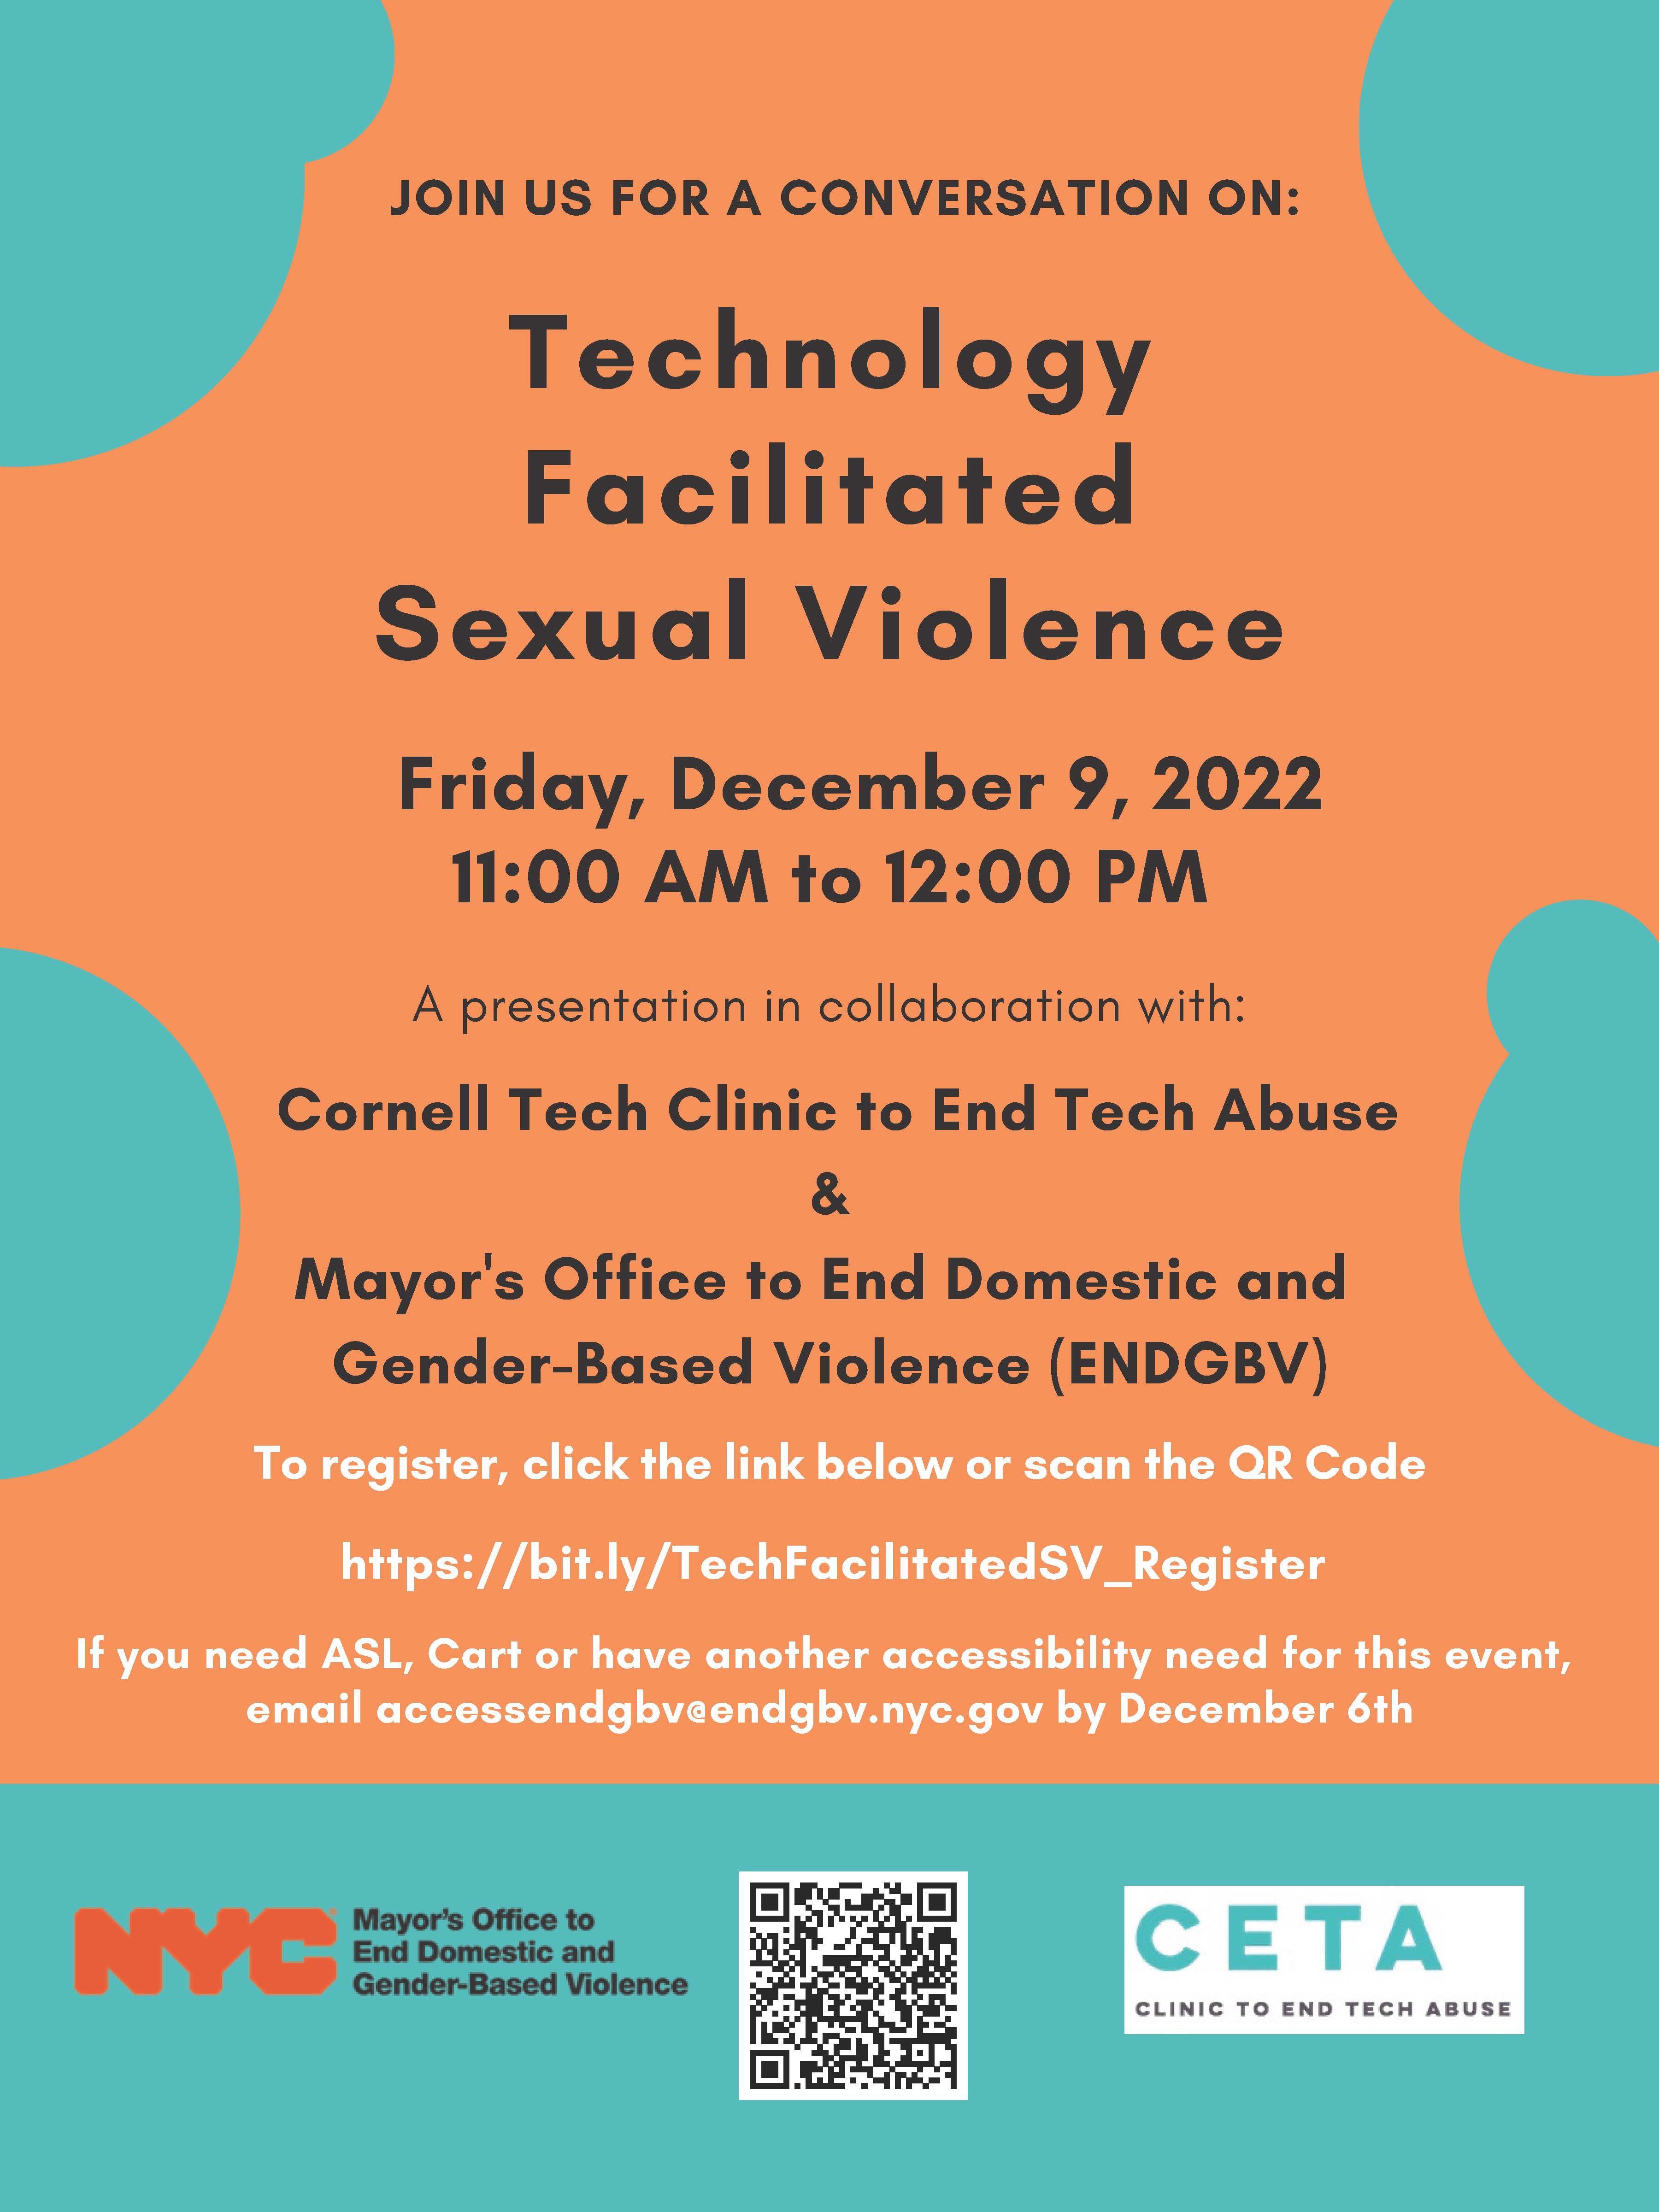 Join ENDGBV for a conversation on Technology Facilitated Sexual Violence.